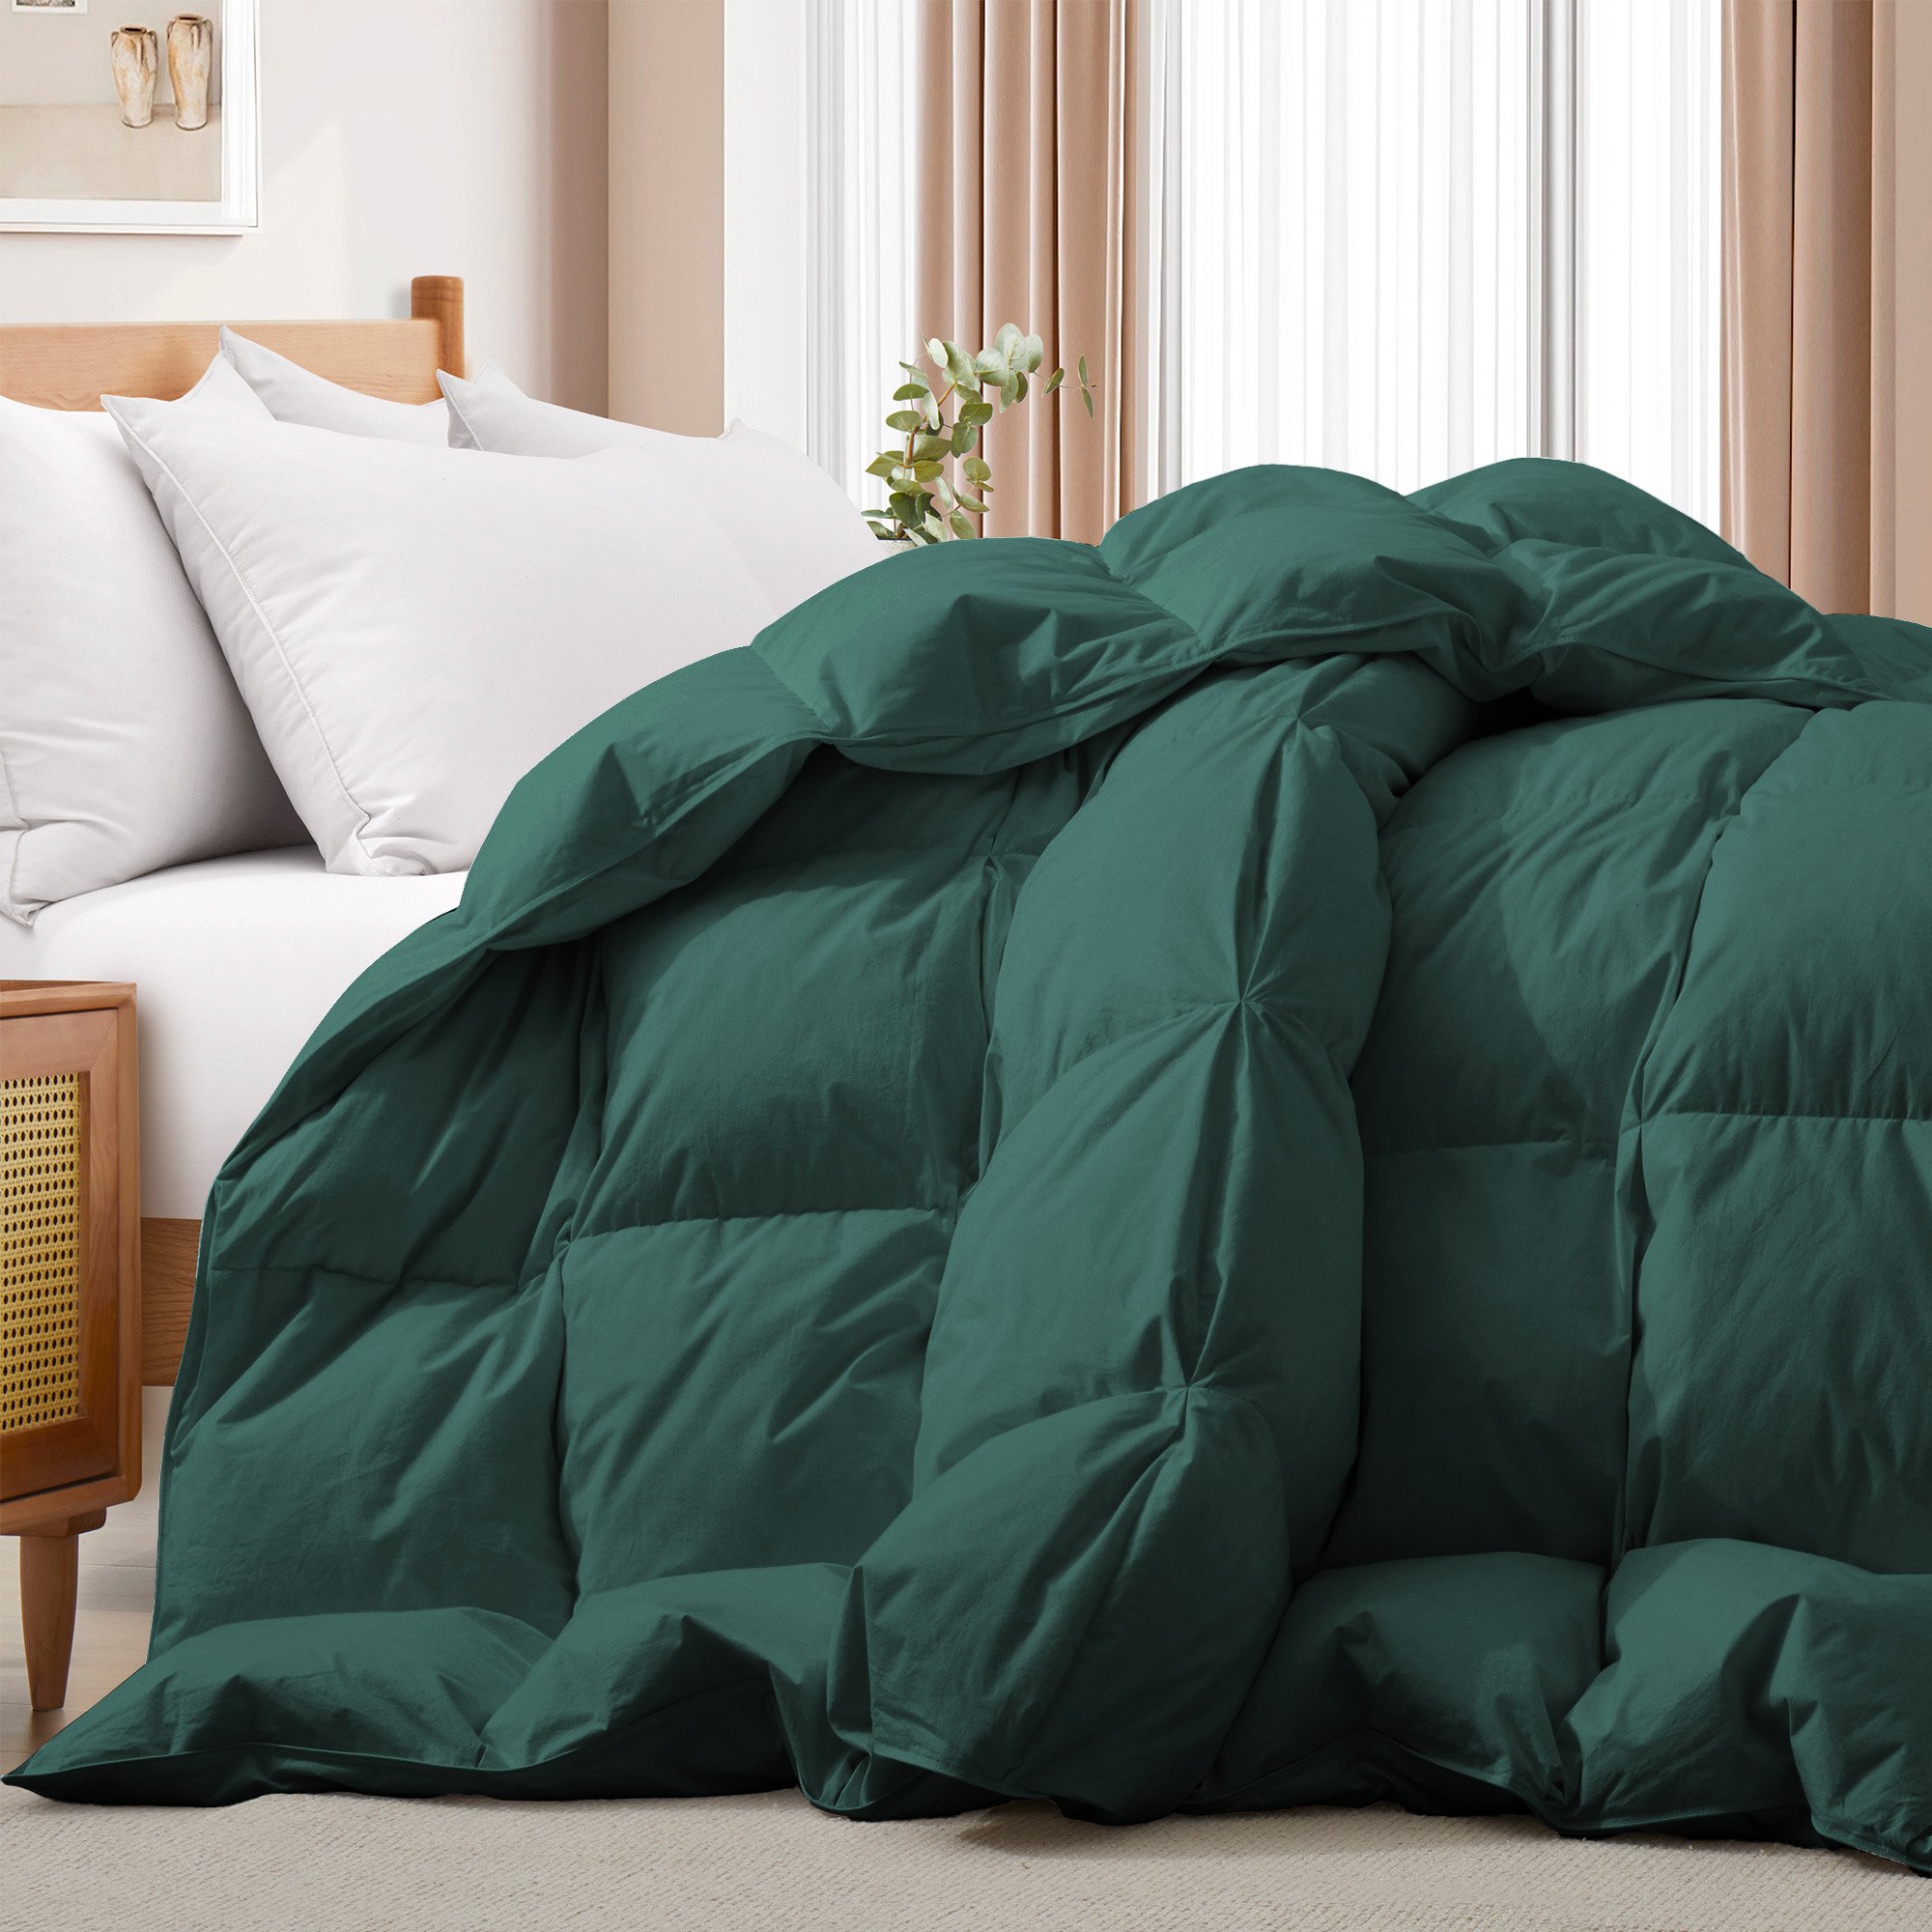 Premium Goose Feather And Down Duvet Insert -All Season Comforter With Breathable Cotton Cover - Full/Queen-90*90